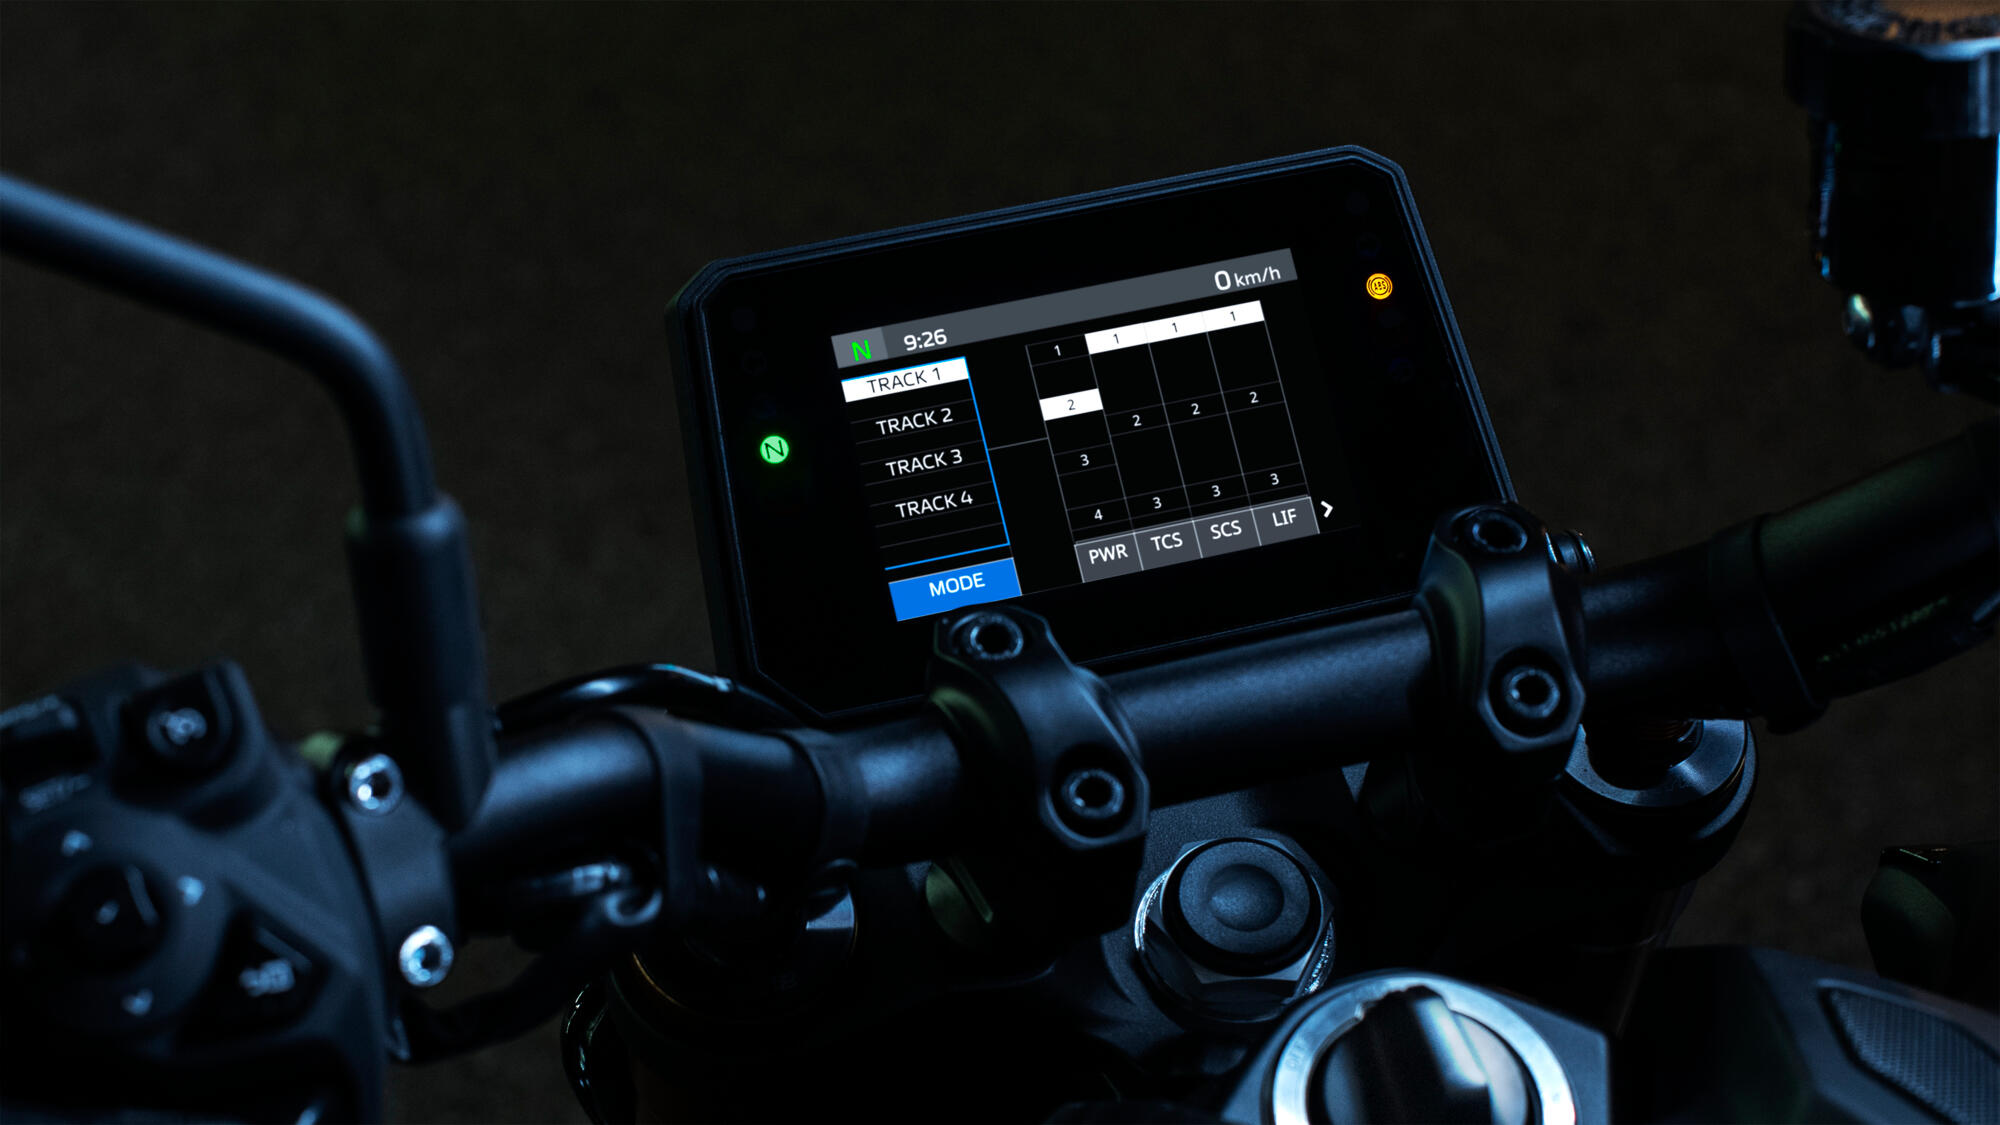 6-axis IMU and lean-sensitive rider aids